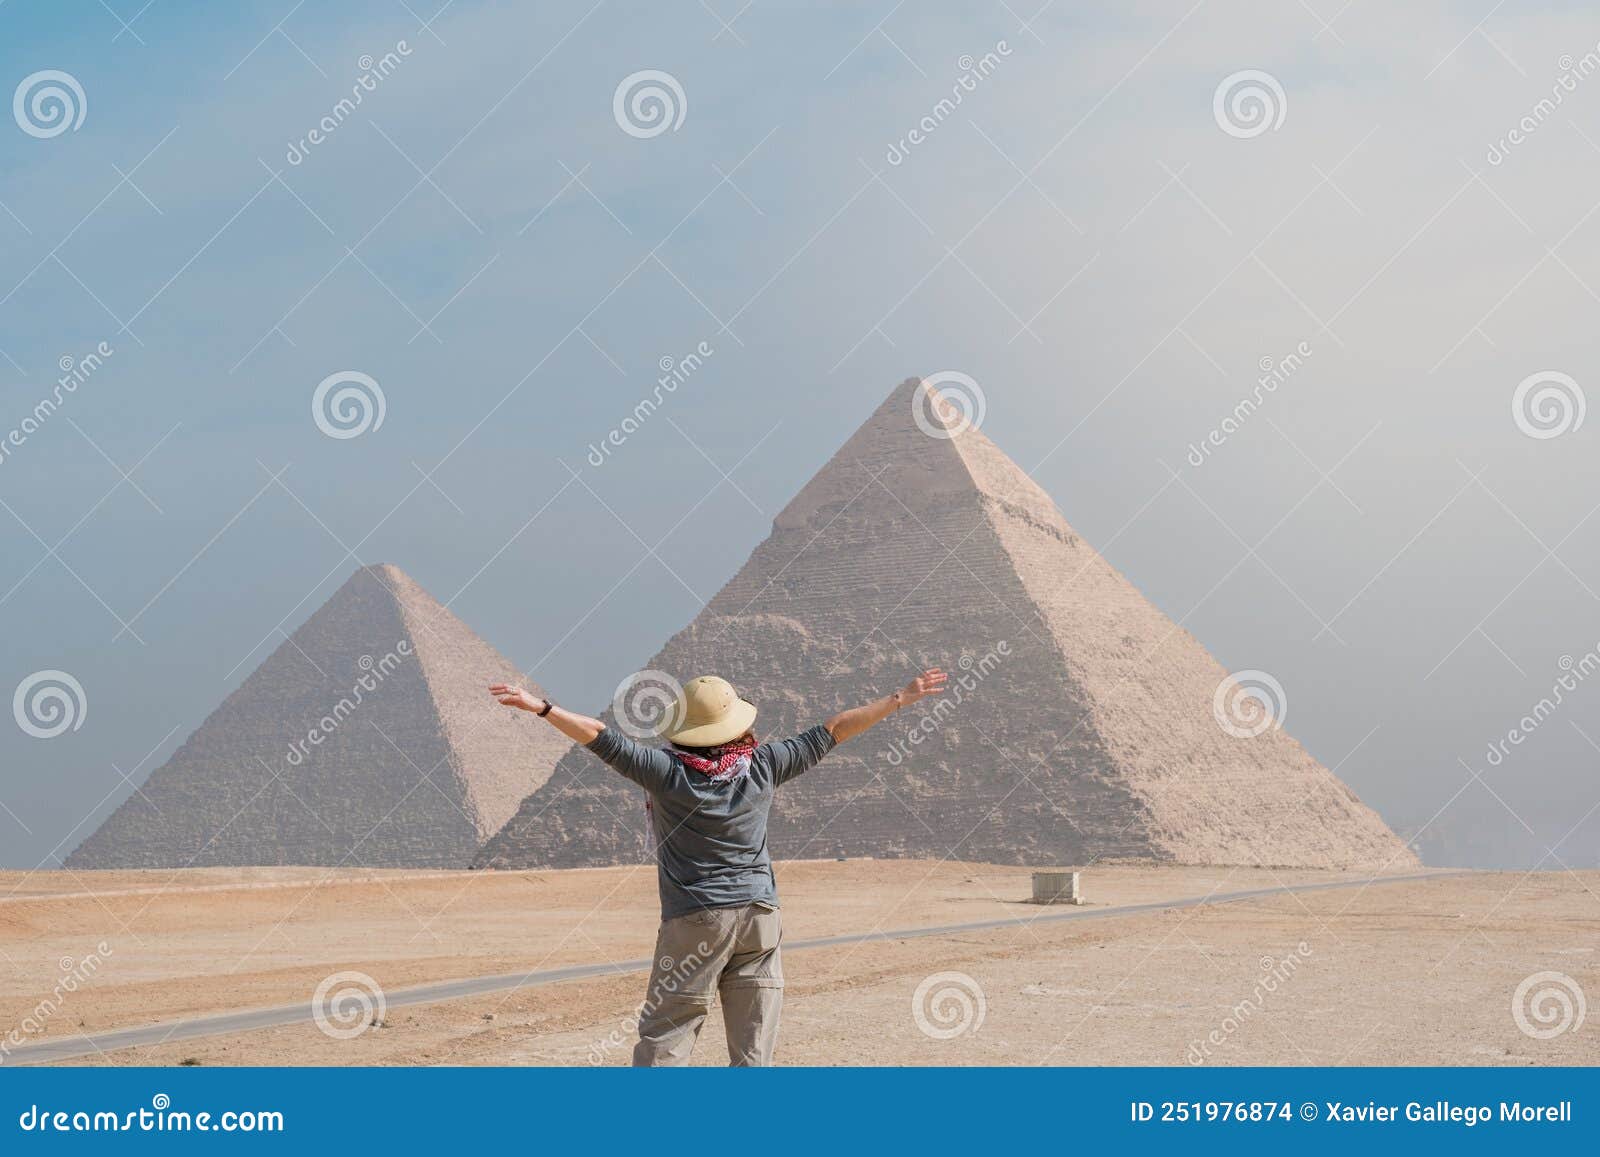 back view of tourist woman standing in front of pyramids. egypt, cairo - giza